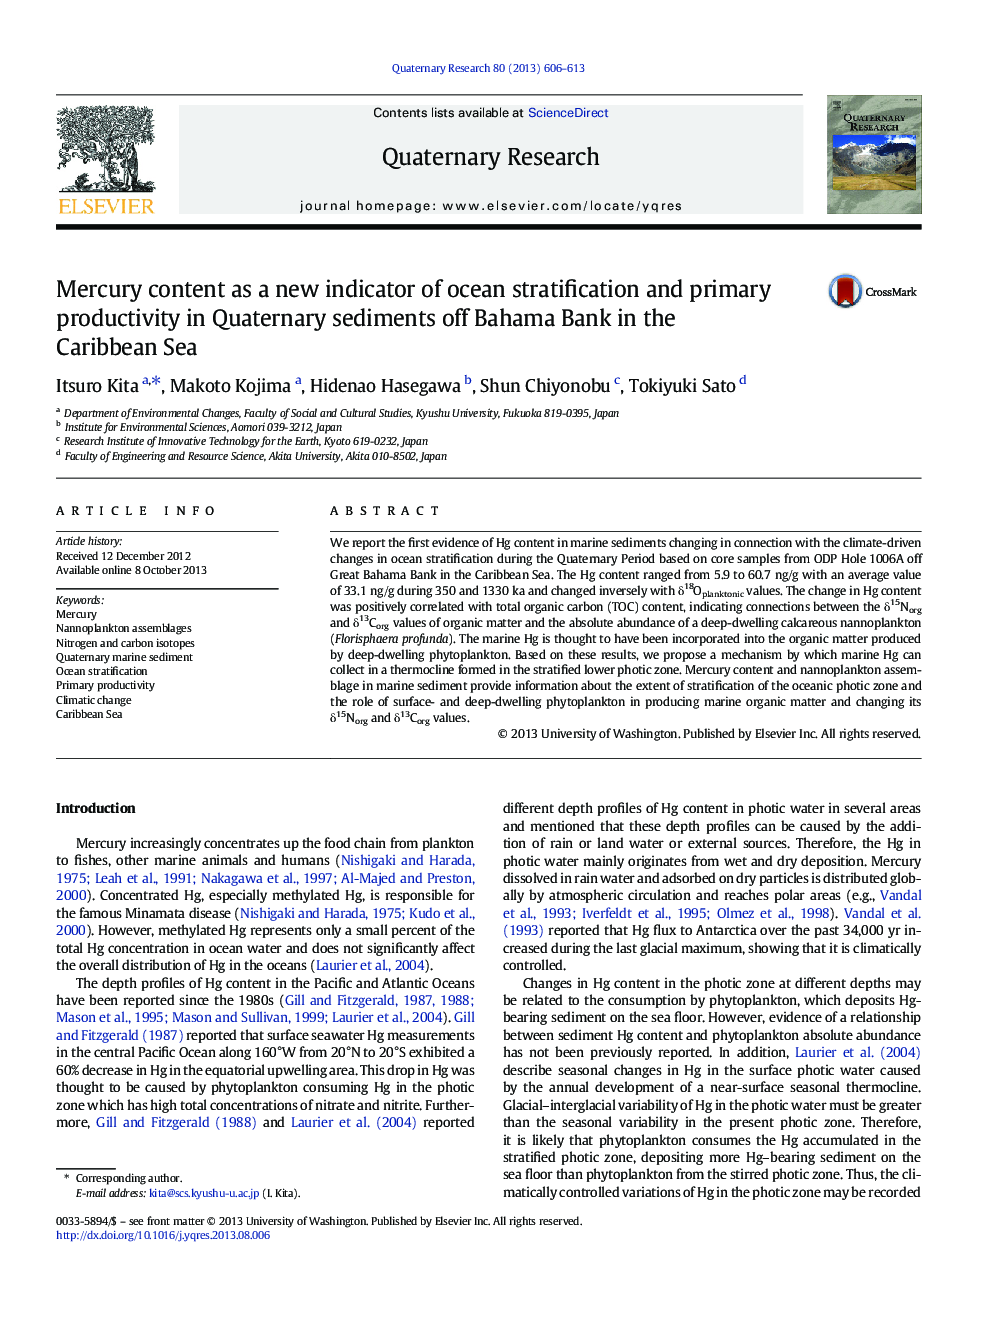 Mercury content as a new indicator of ocean stratification and primary productivity in Quaternary sediments off Bahama Bank in the Caribbean Sea